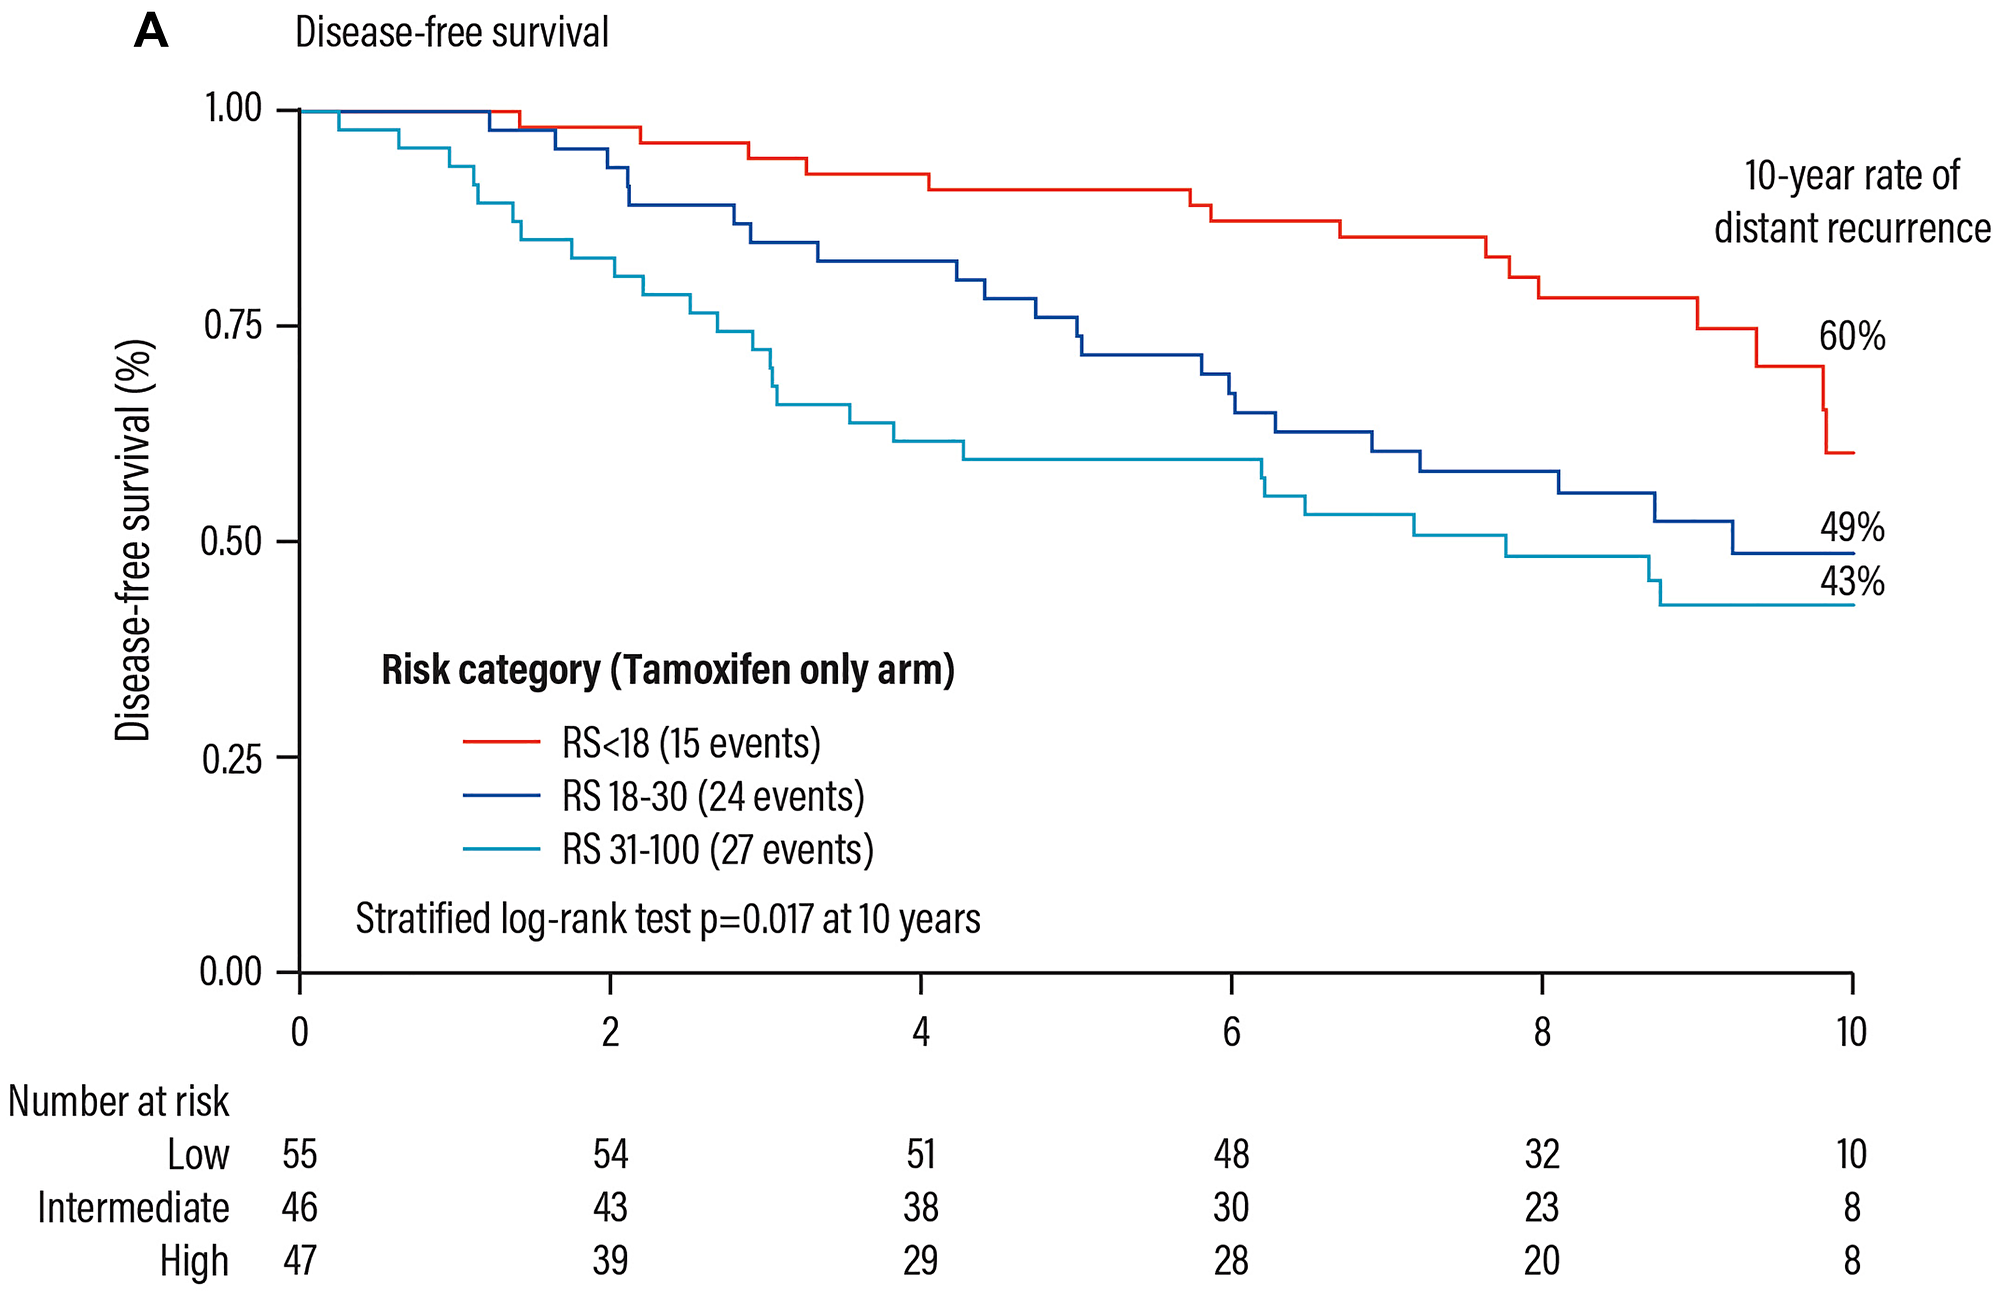 Prognostic validation of the Oncotype DX test in patients with HR+ early breast cancer.